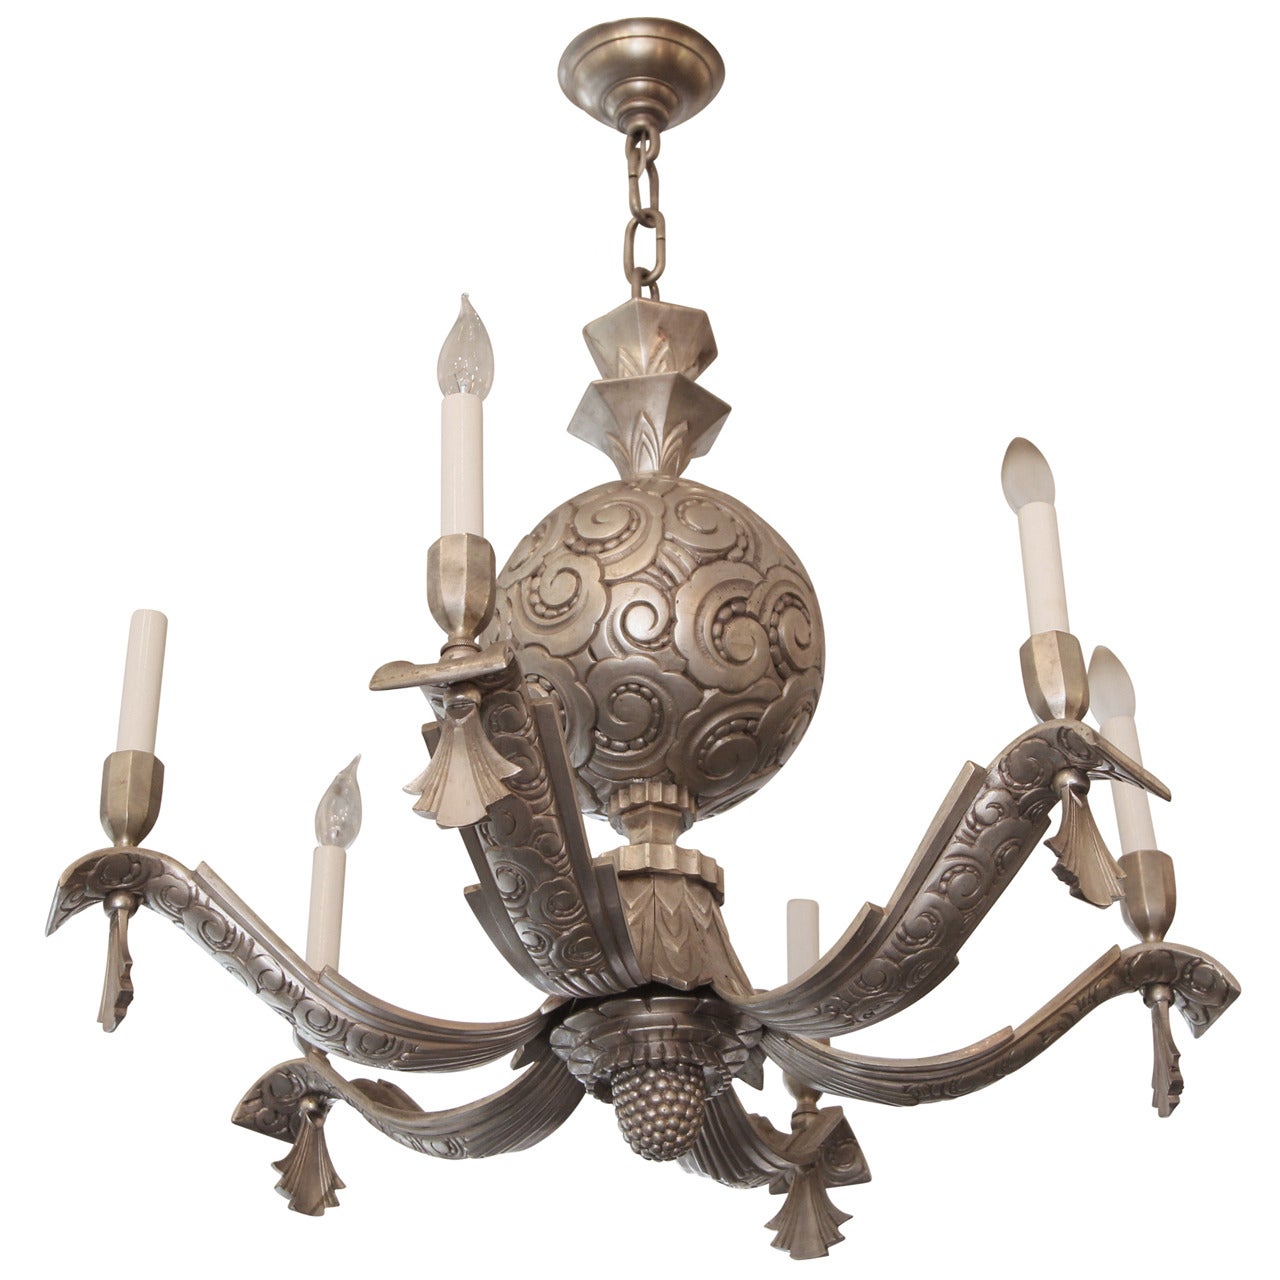 1920s Nickeled Bronze French Art Deco 6 Arm Chandelier with Scalloping